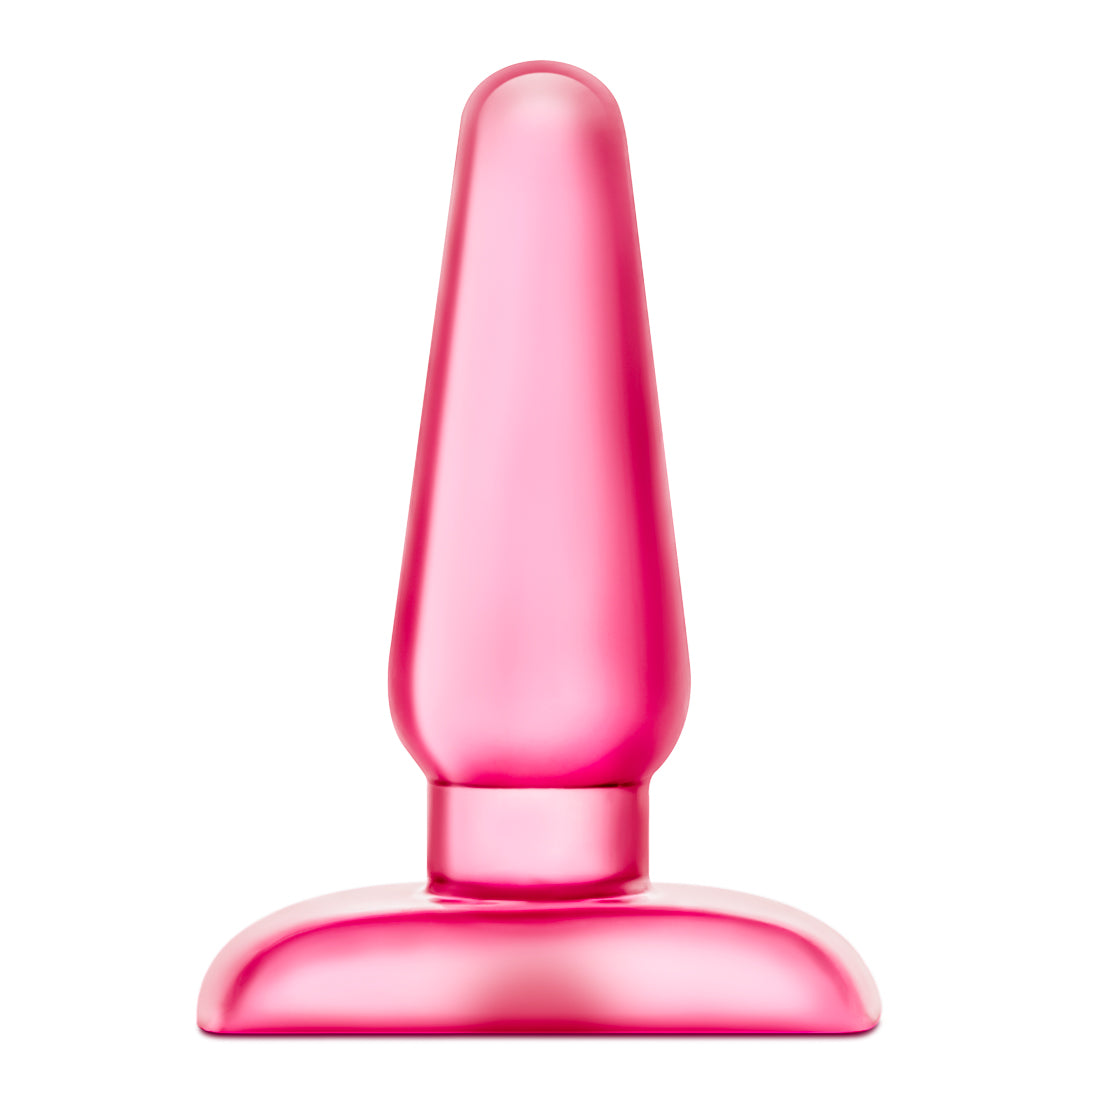 B Yours - Eclipse Anal Pleaser Medium - Pink